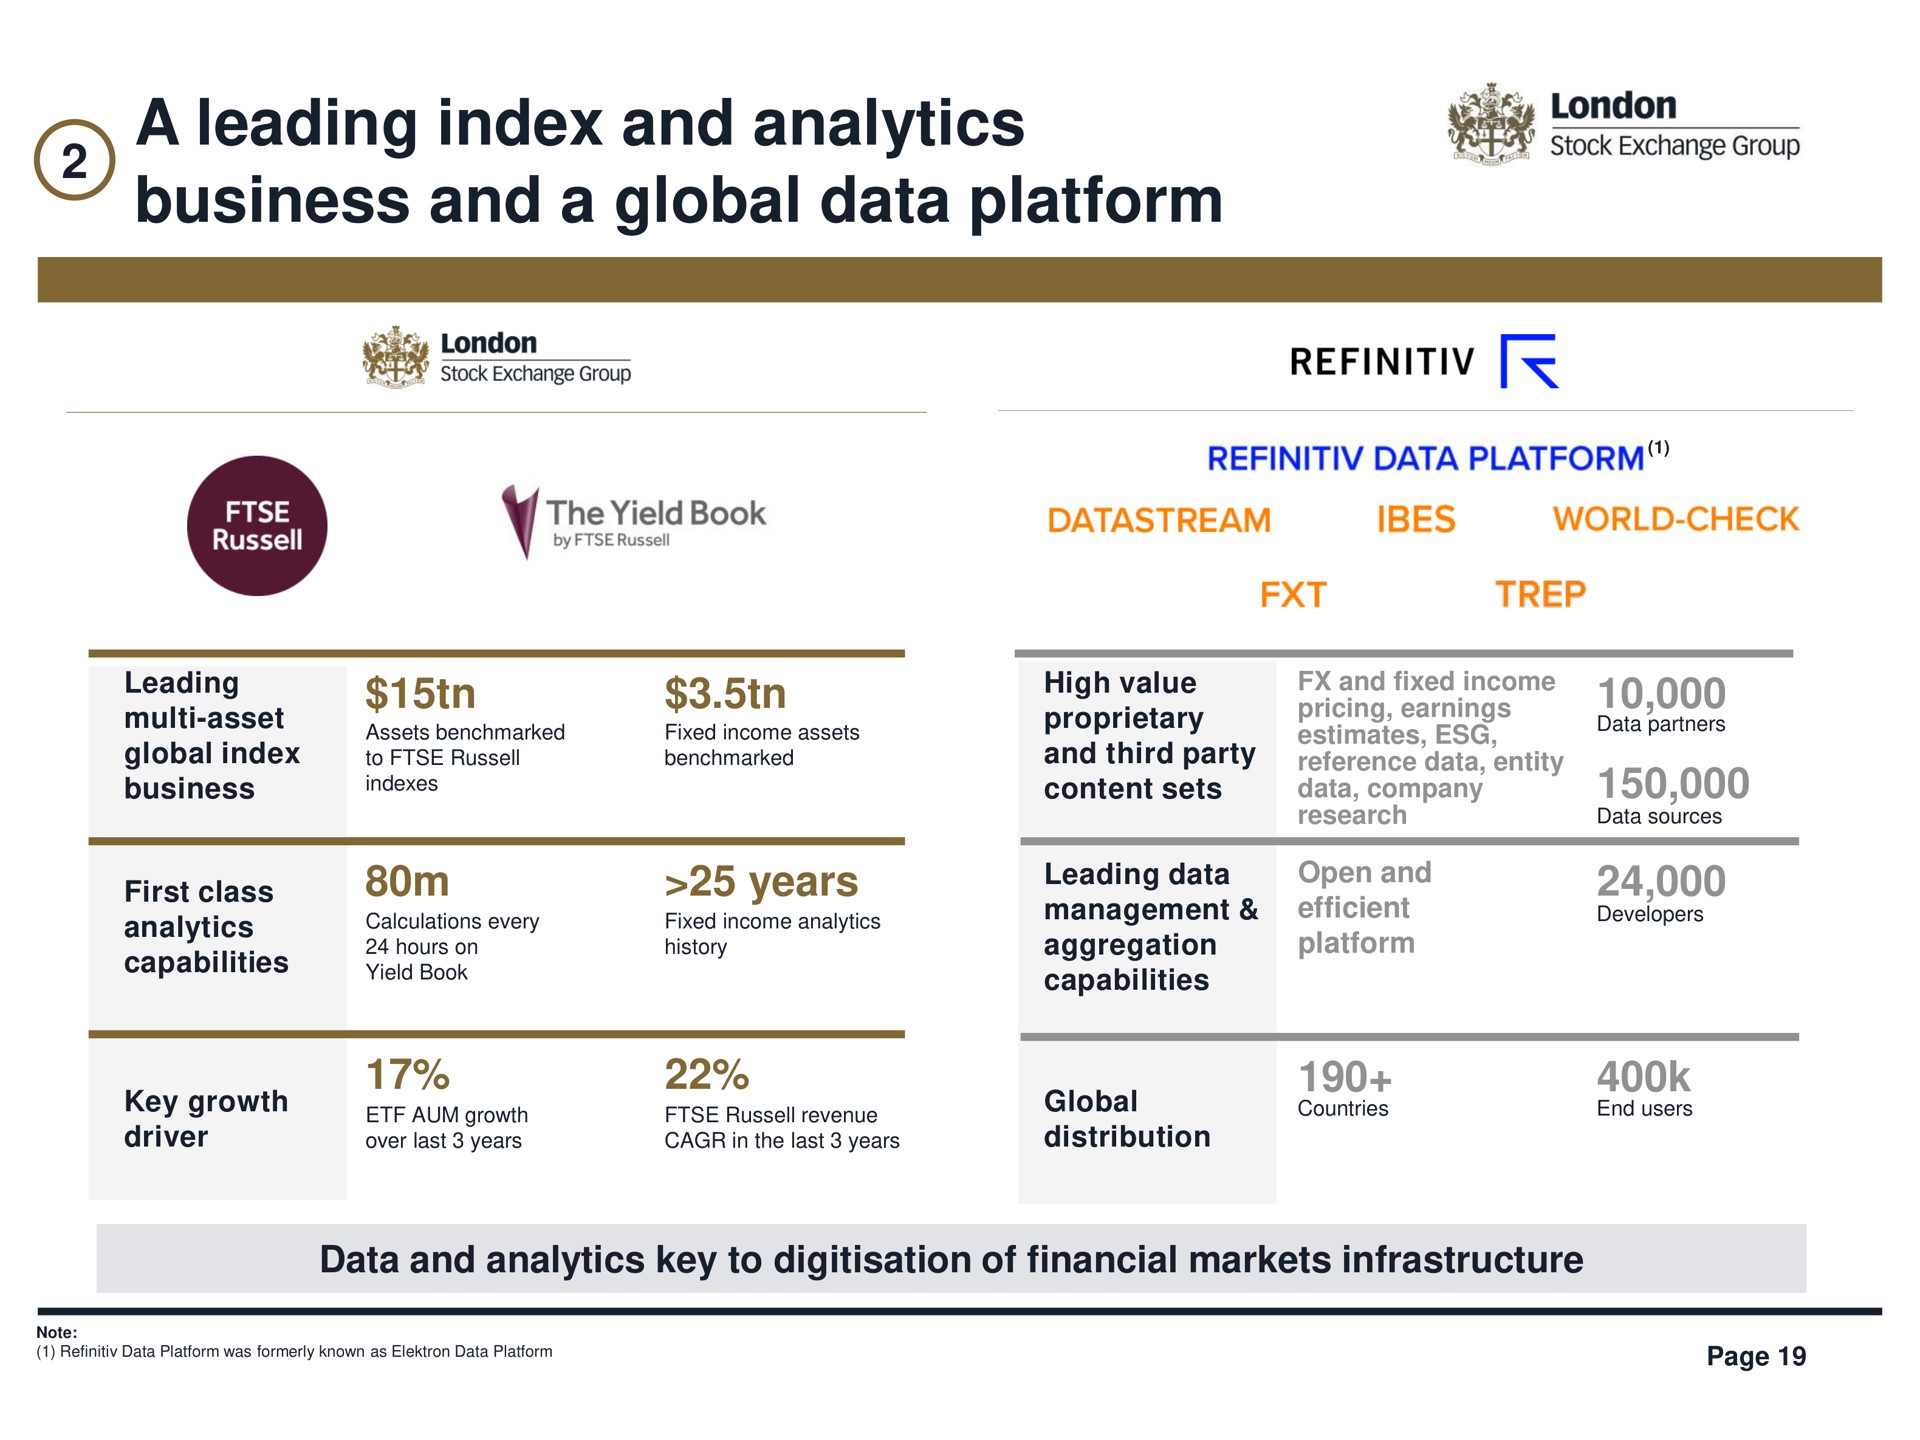 a leading index and analytics business and a global data platform fop stock exchange group gene world check high value pang | LSE